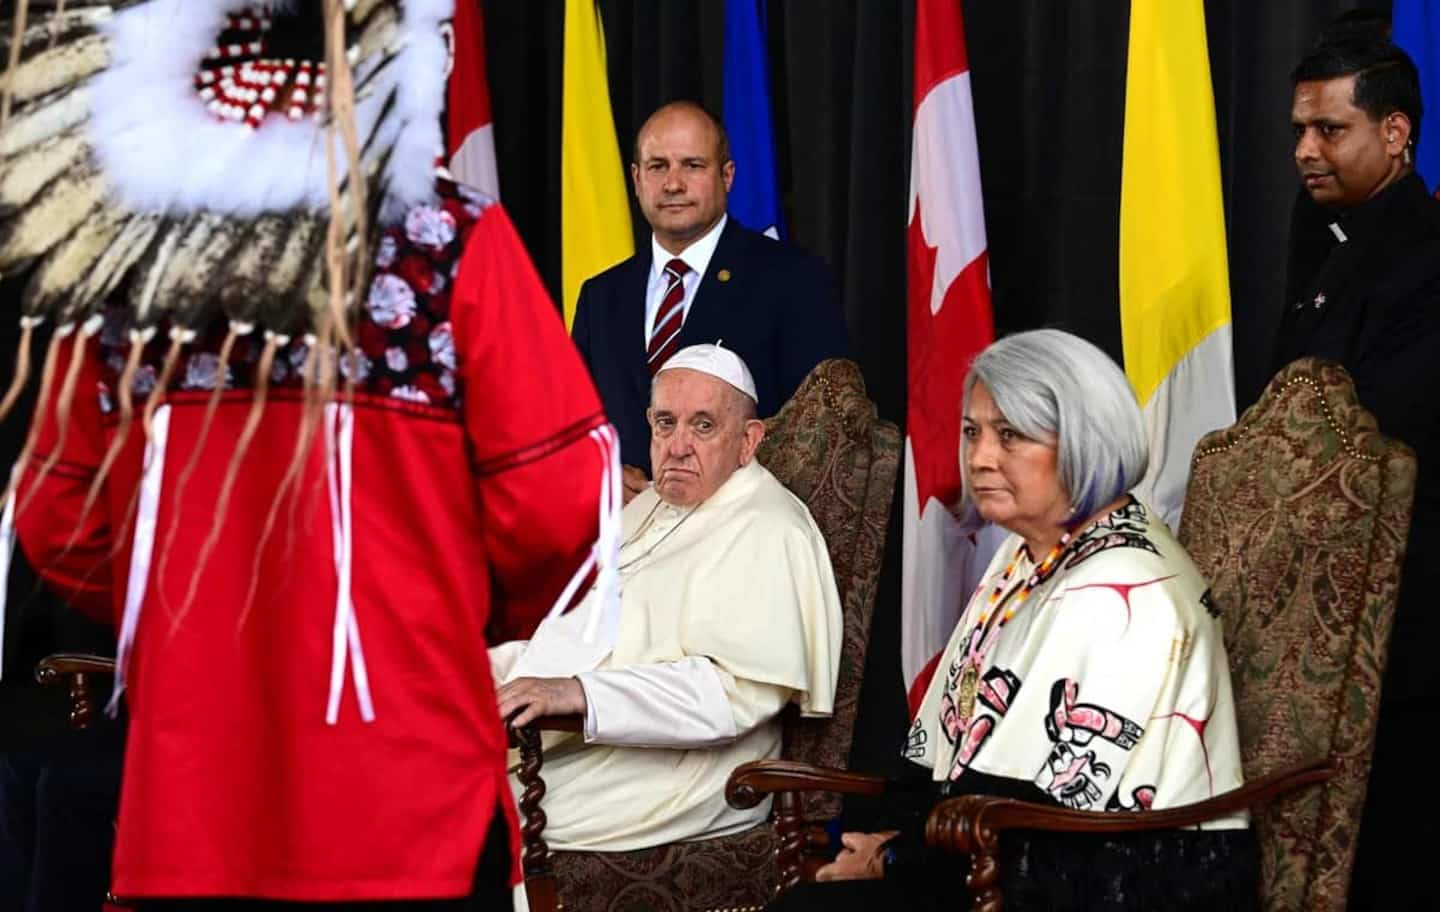 Governor General Acknowledges Apology from Pope Francis